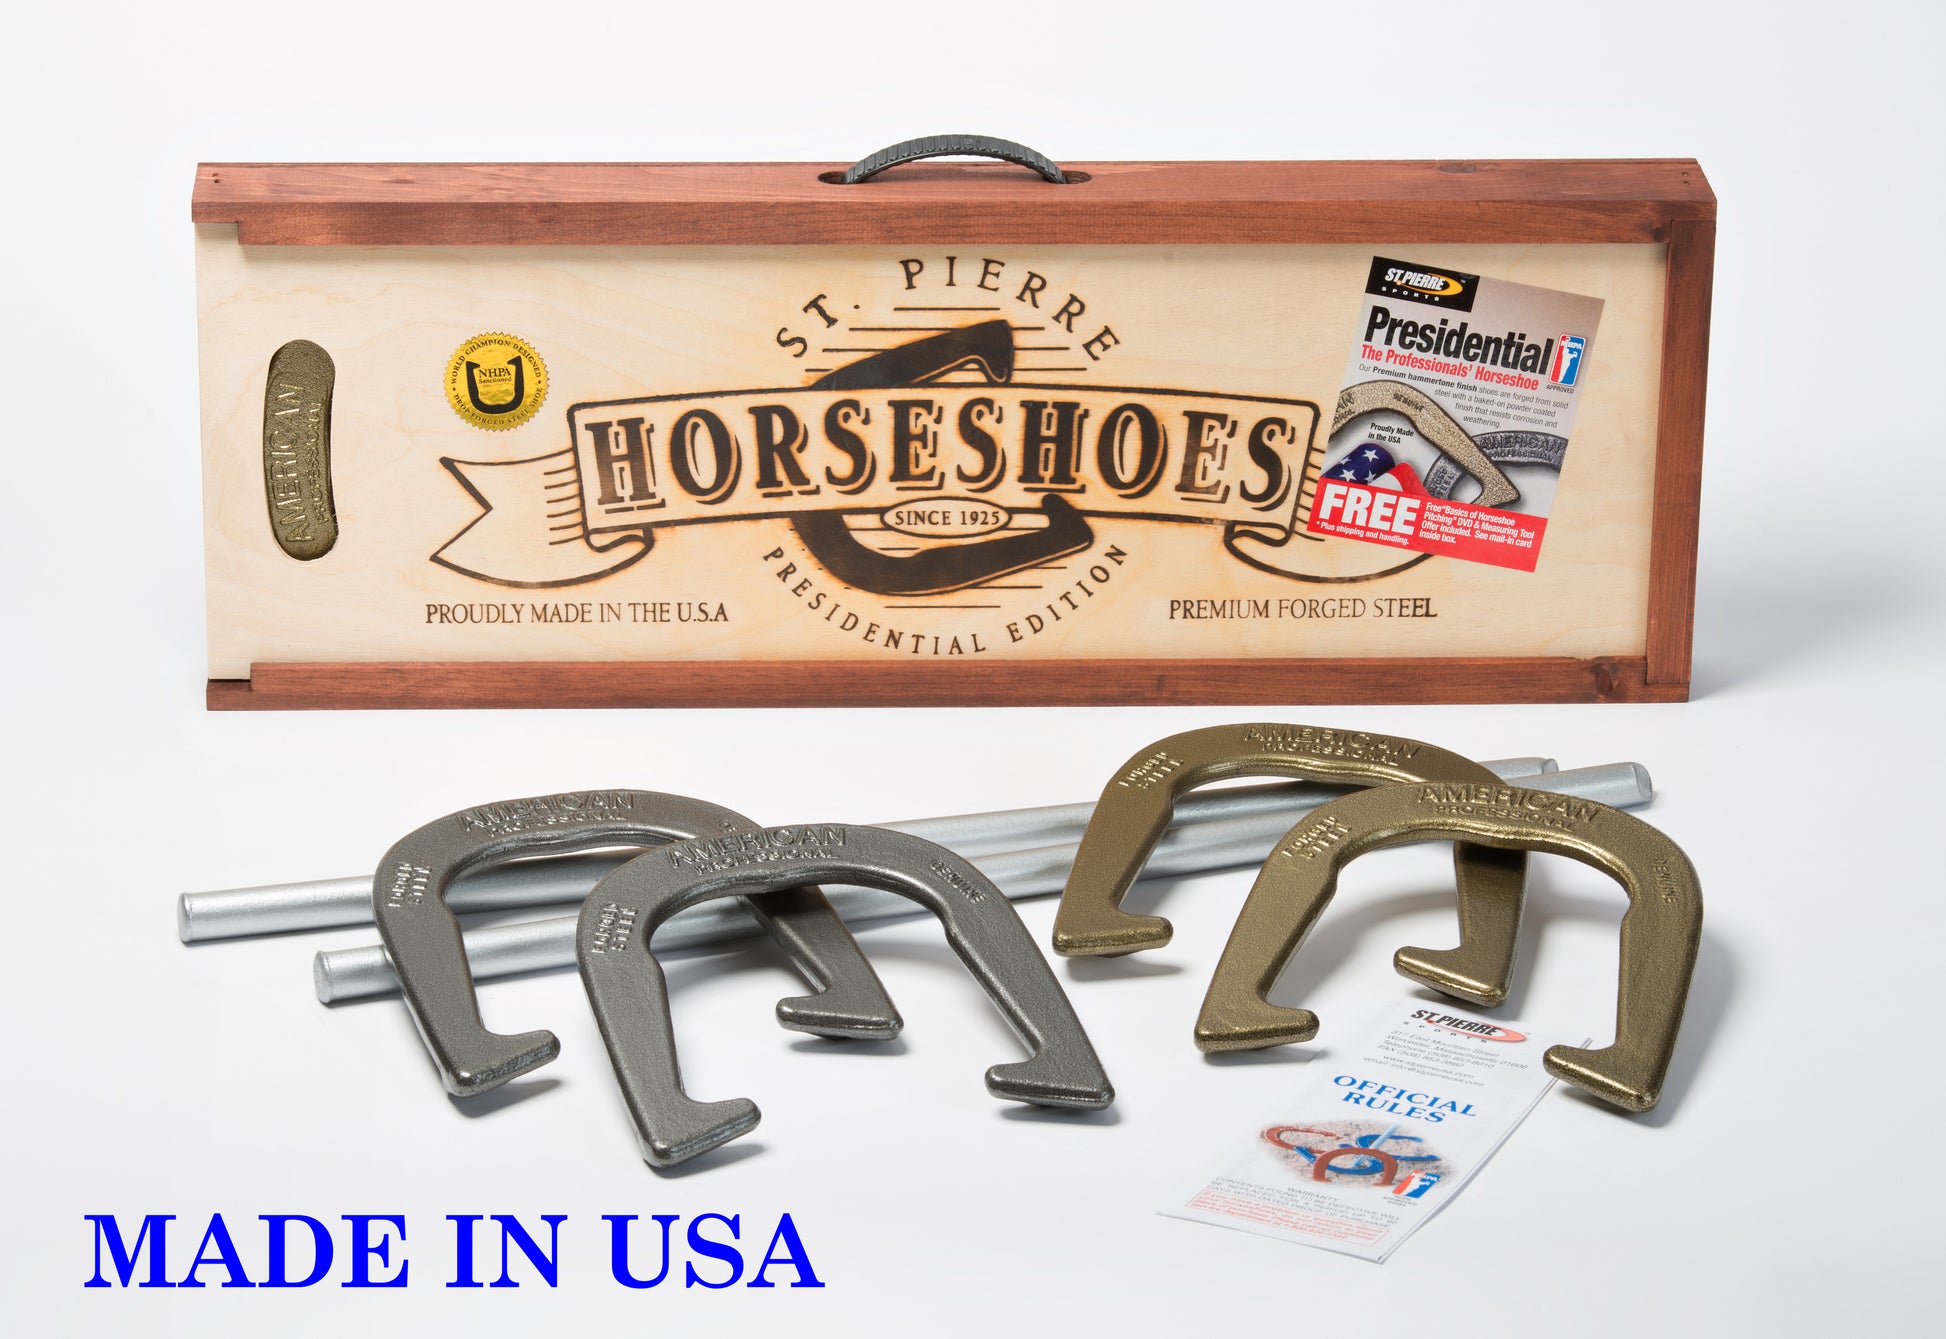 Top Ringer Horseshoes Pitching Horse Shoes 2 1/2 lbs FREE Shipping